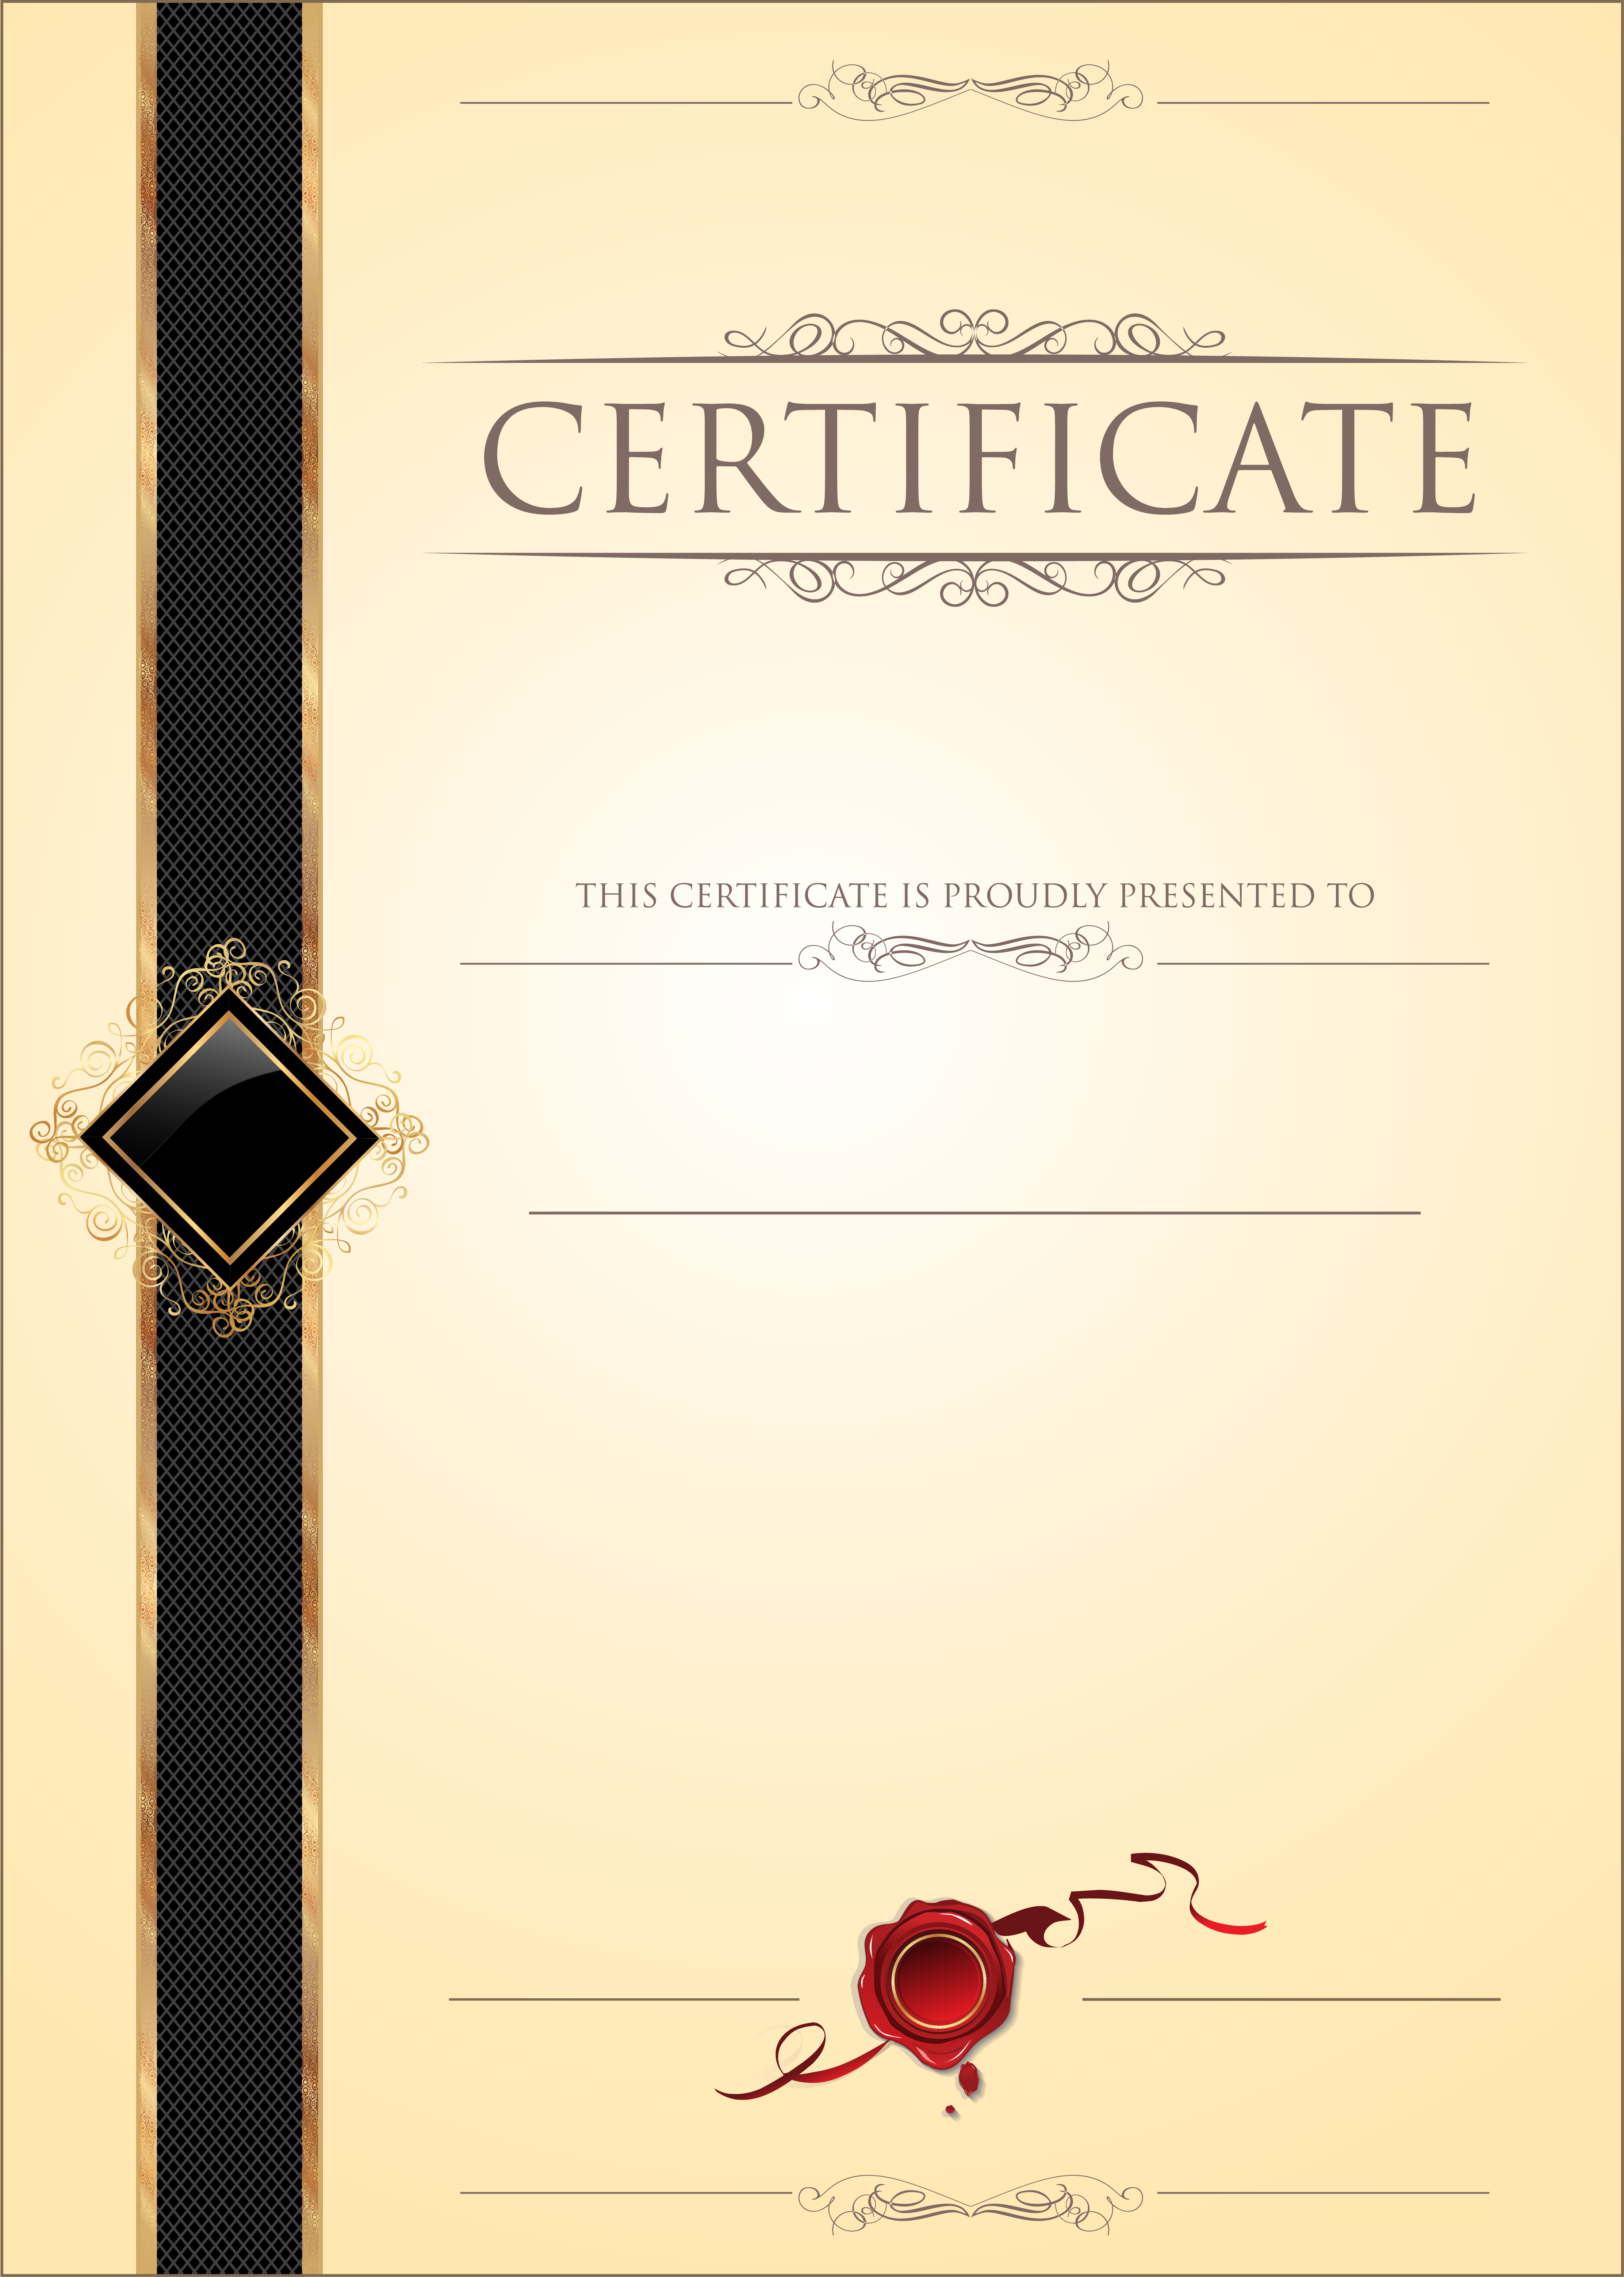 Certificate Background PNG Image